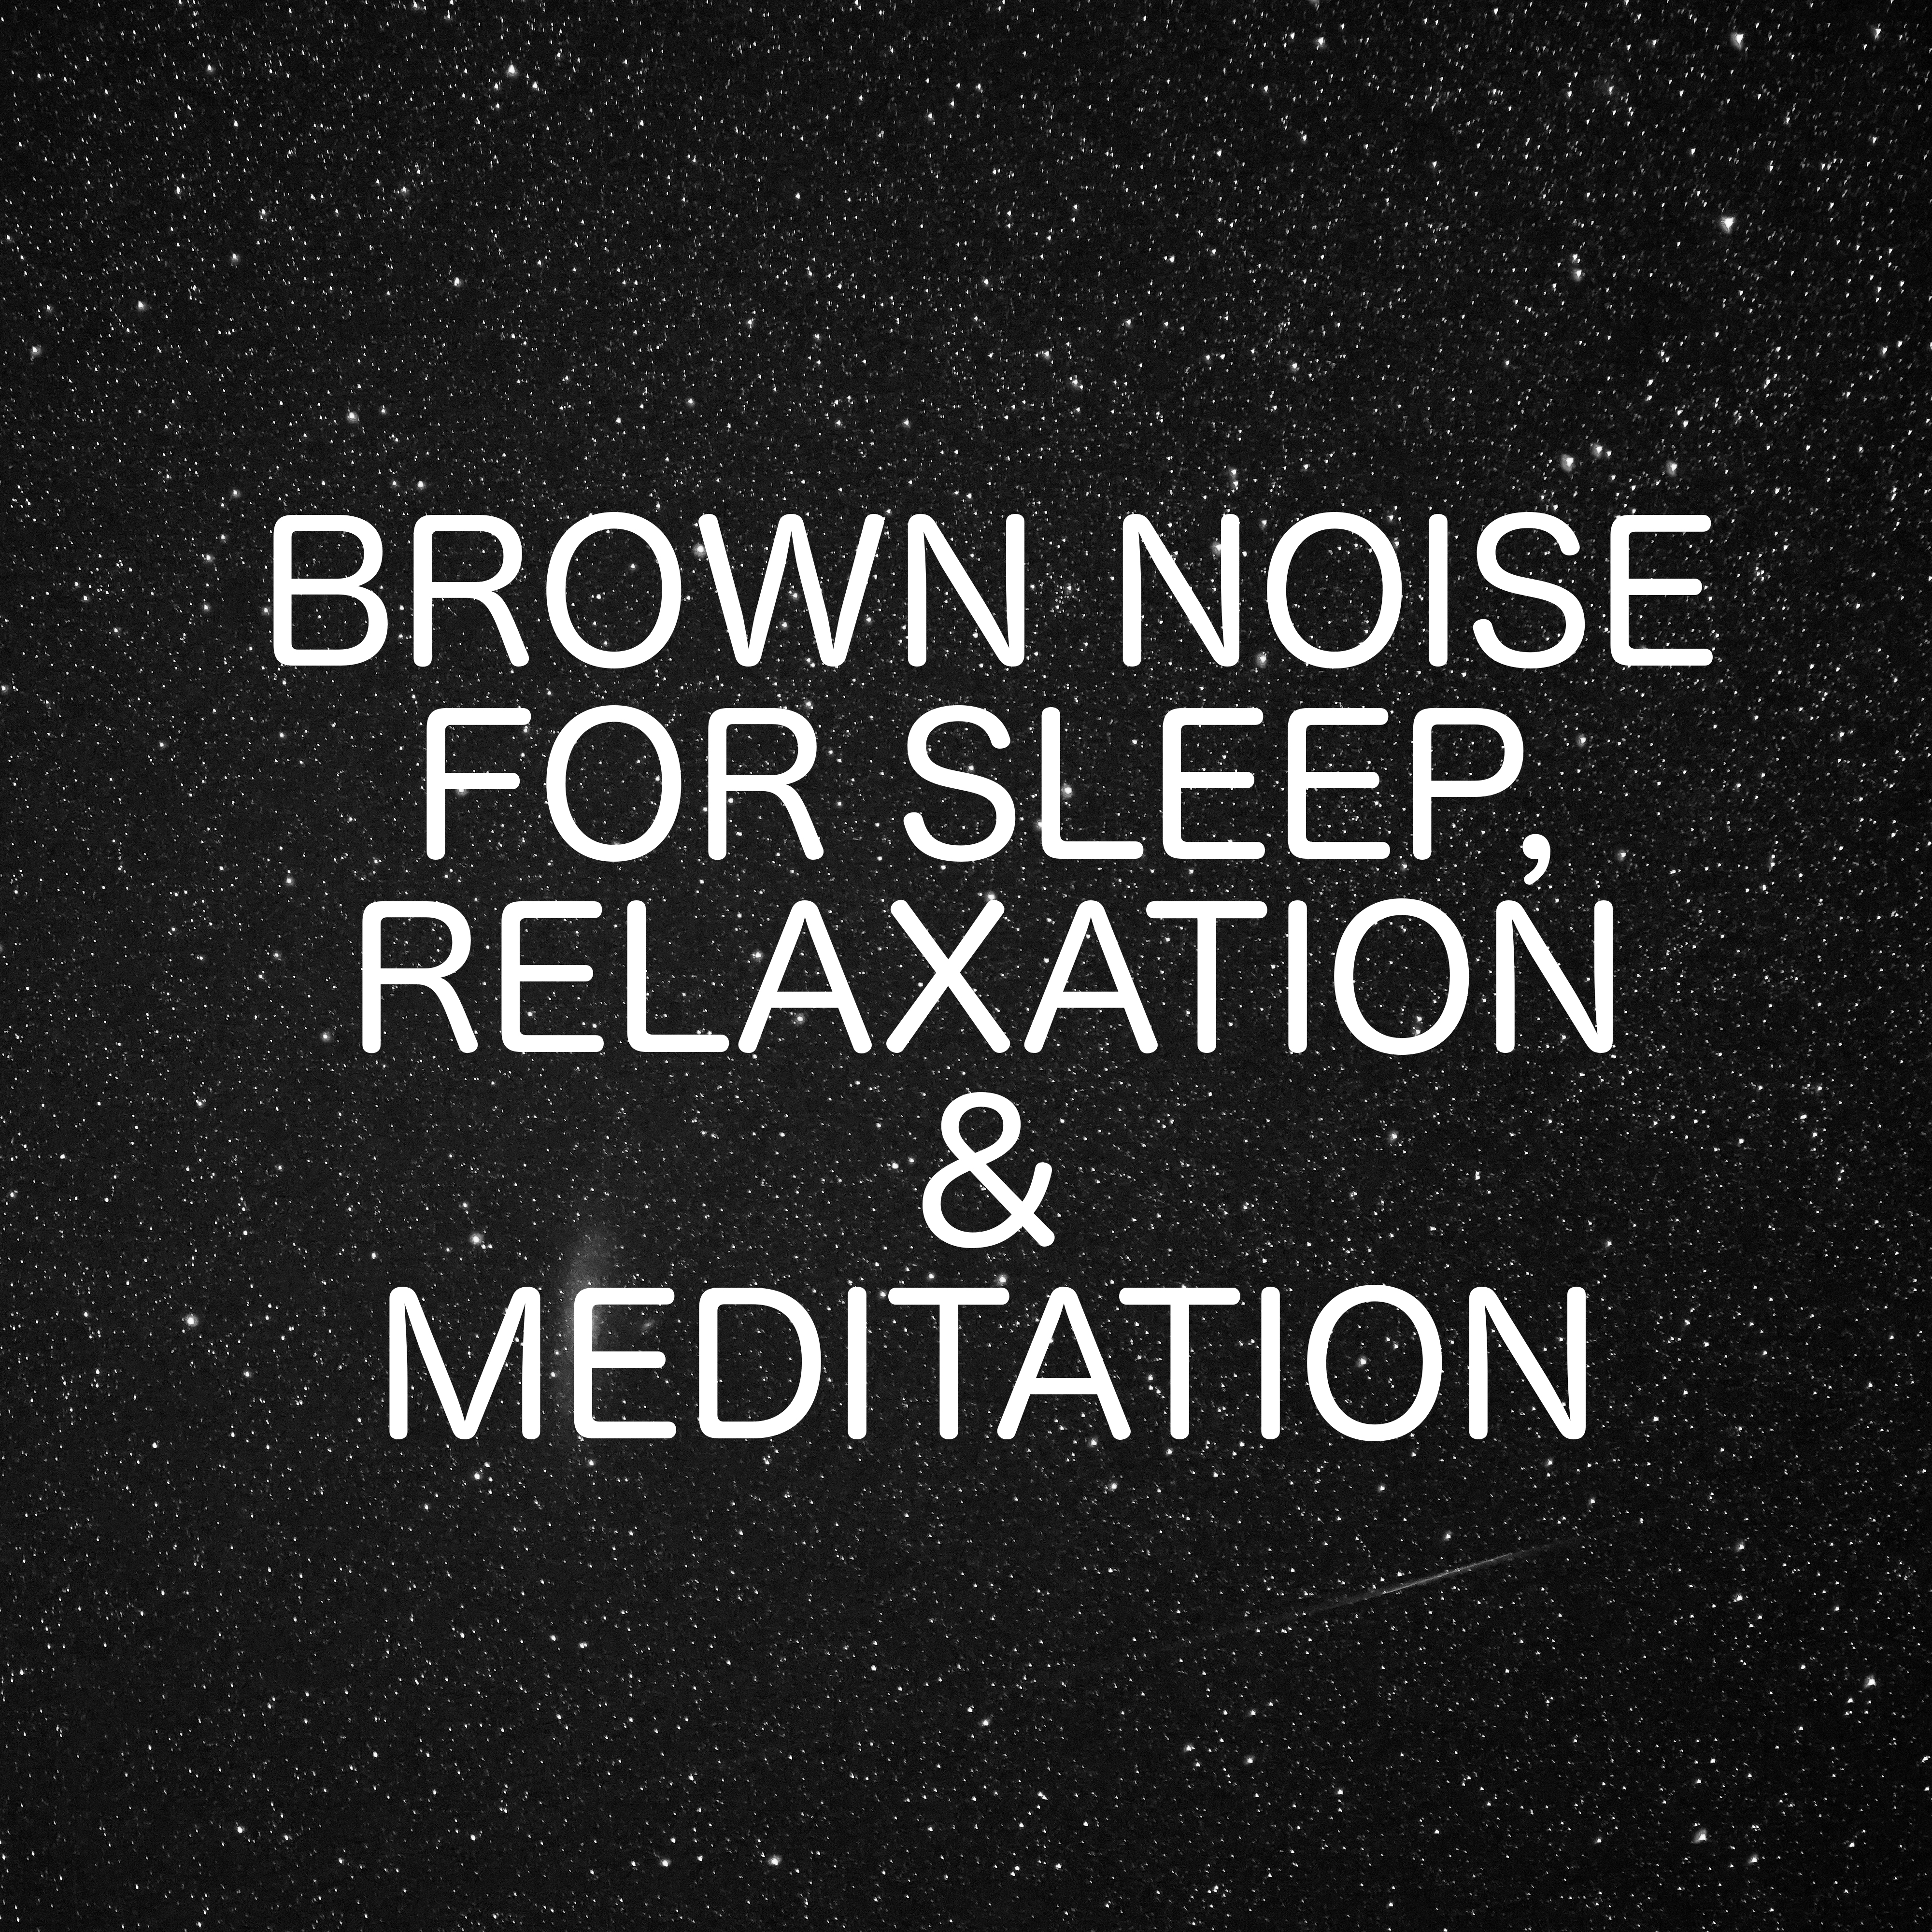 Brown Noise For Sleep, Relaxation And Meditation